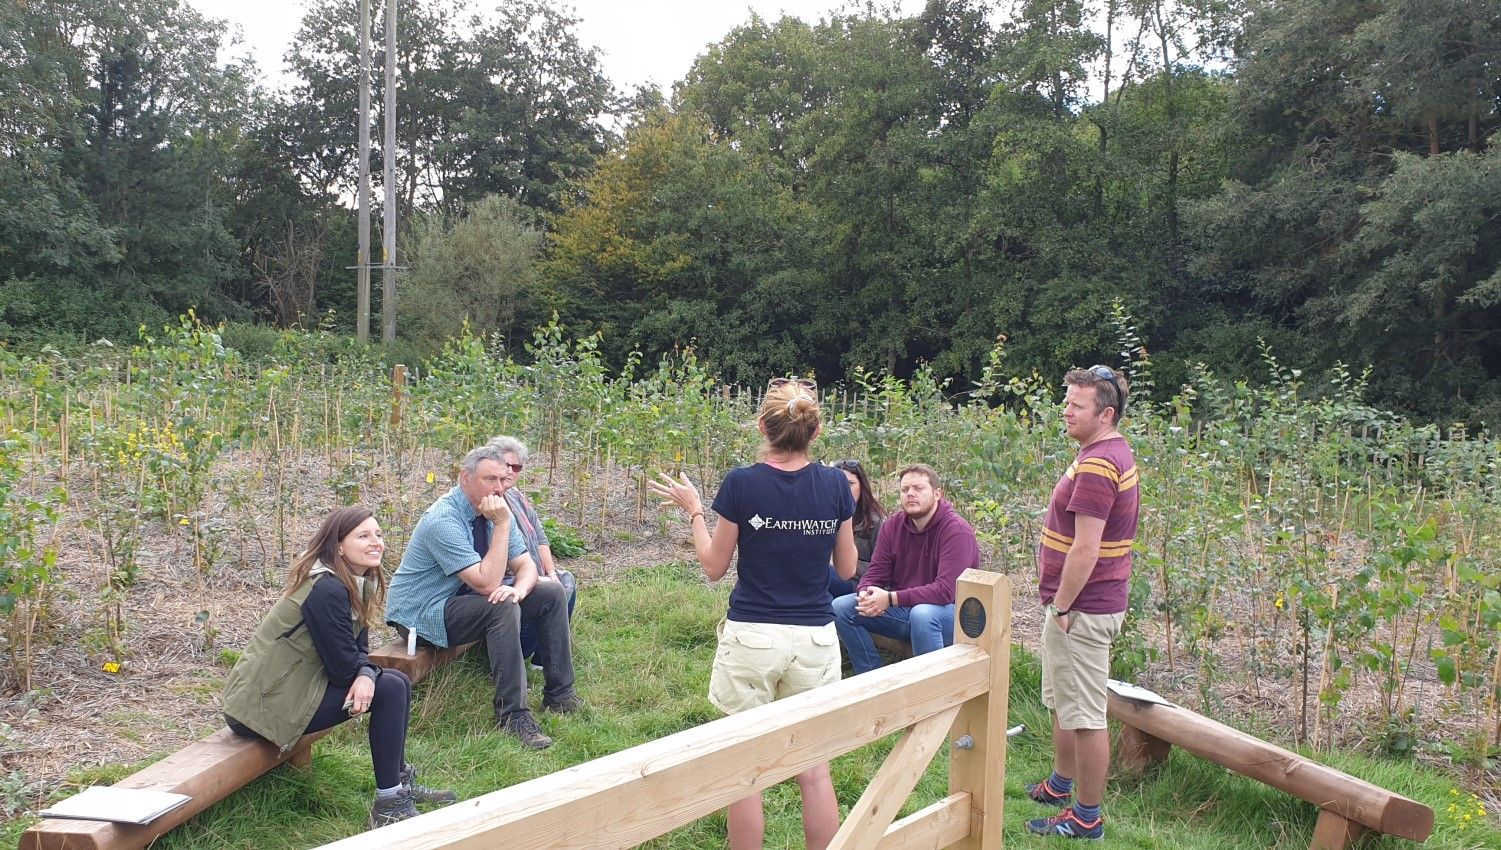 September 2020: First monitoring day (Photo credit Earthwatch Europe)